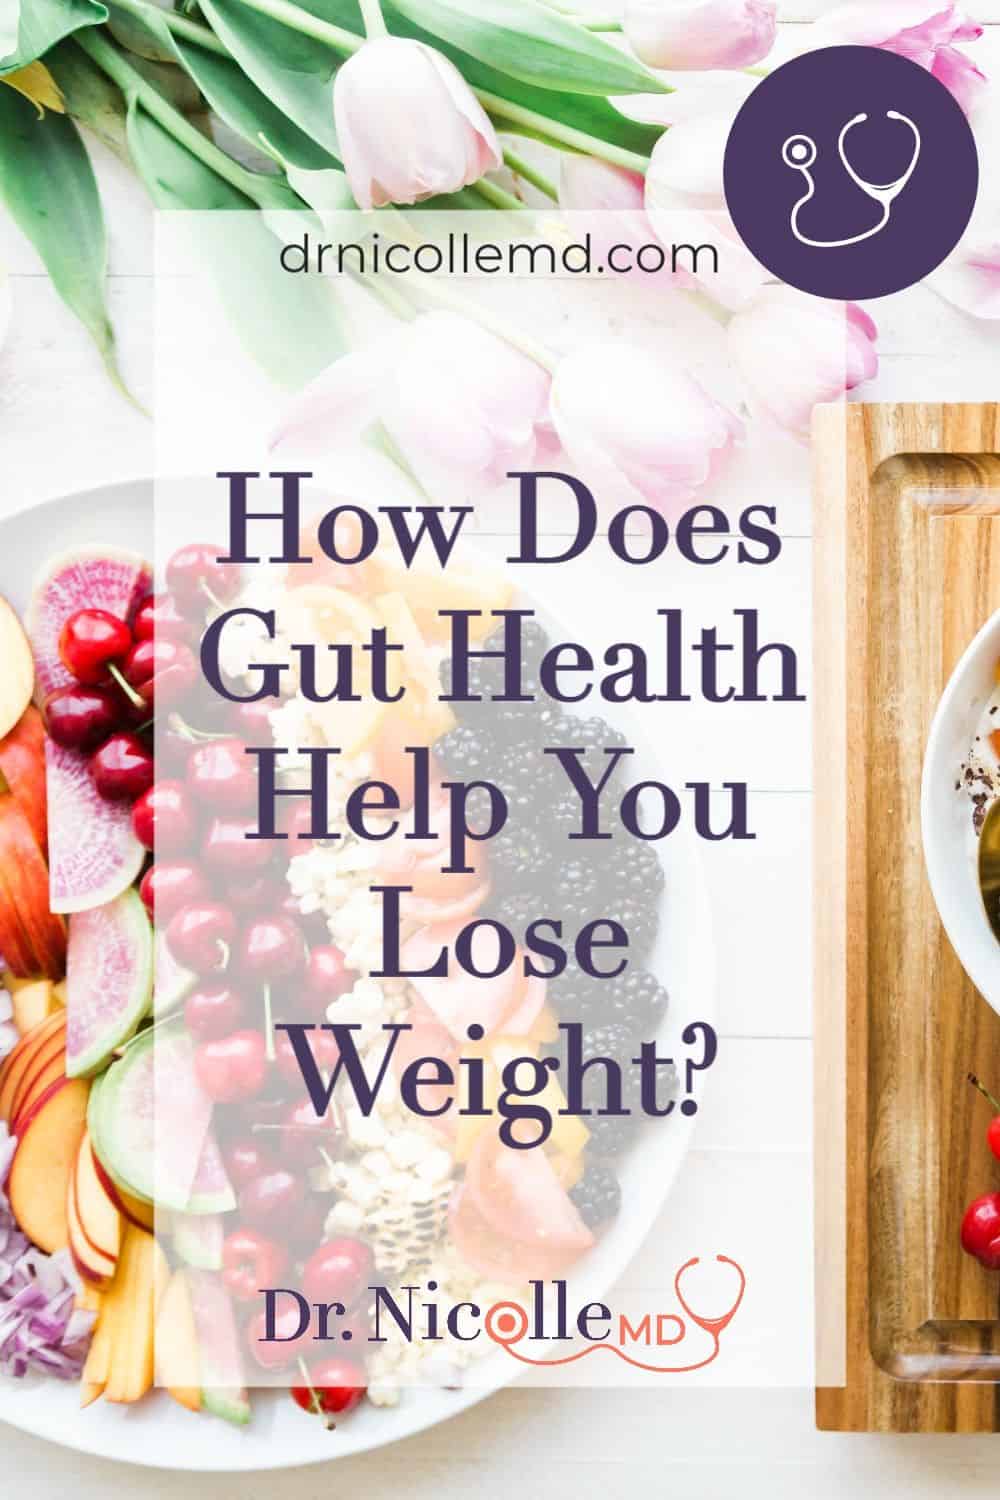 Gut Healthy Foods and Weight Loss